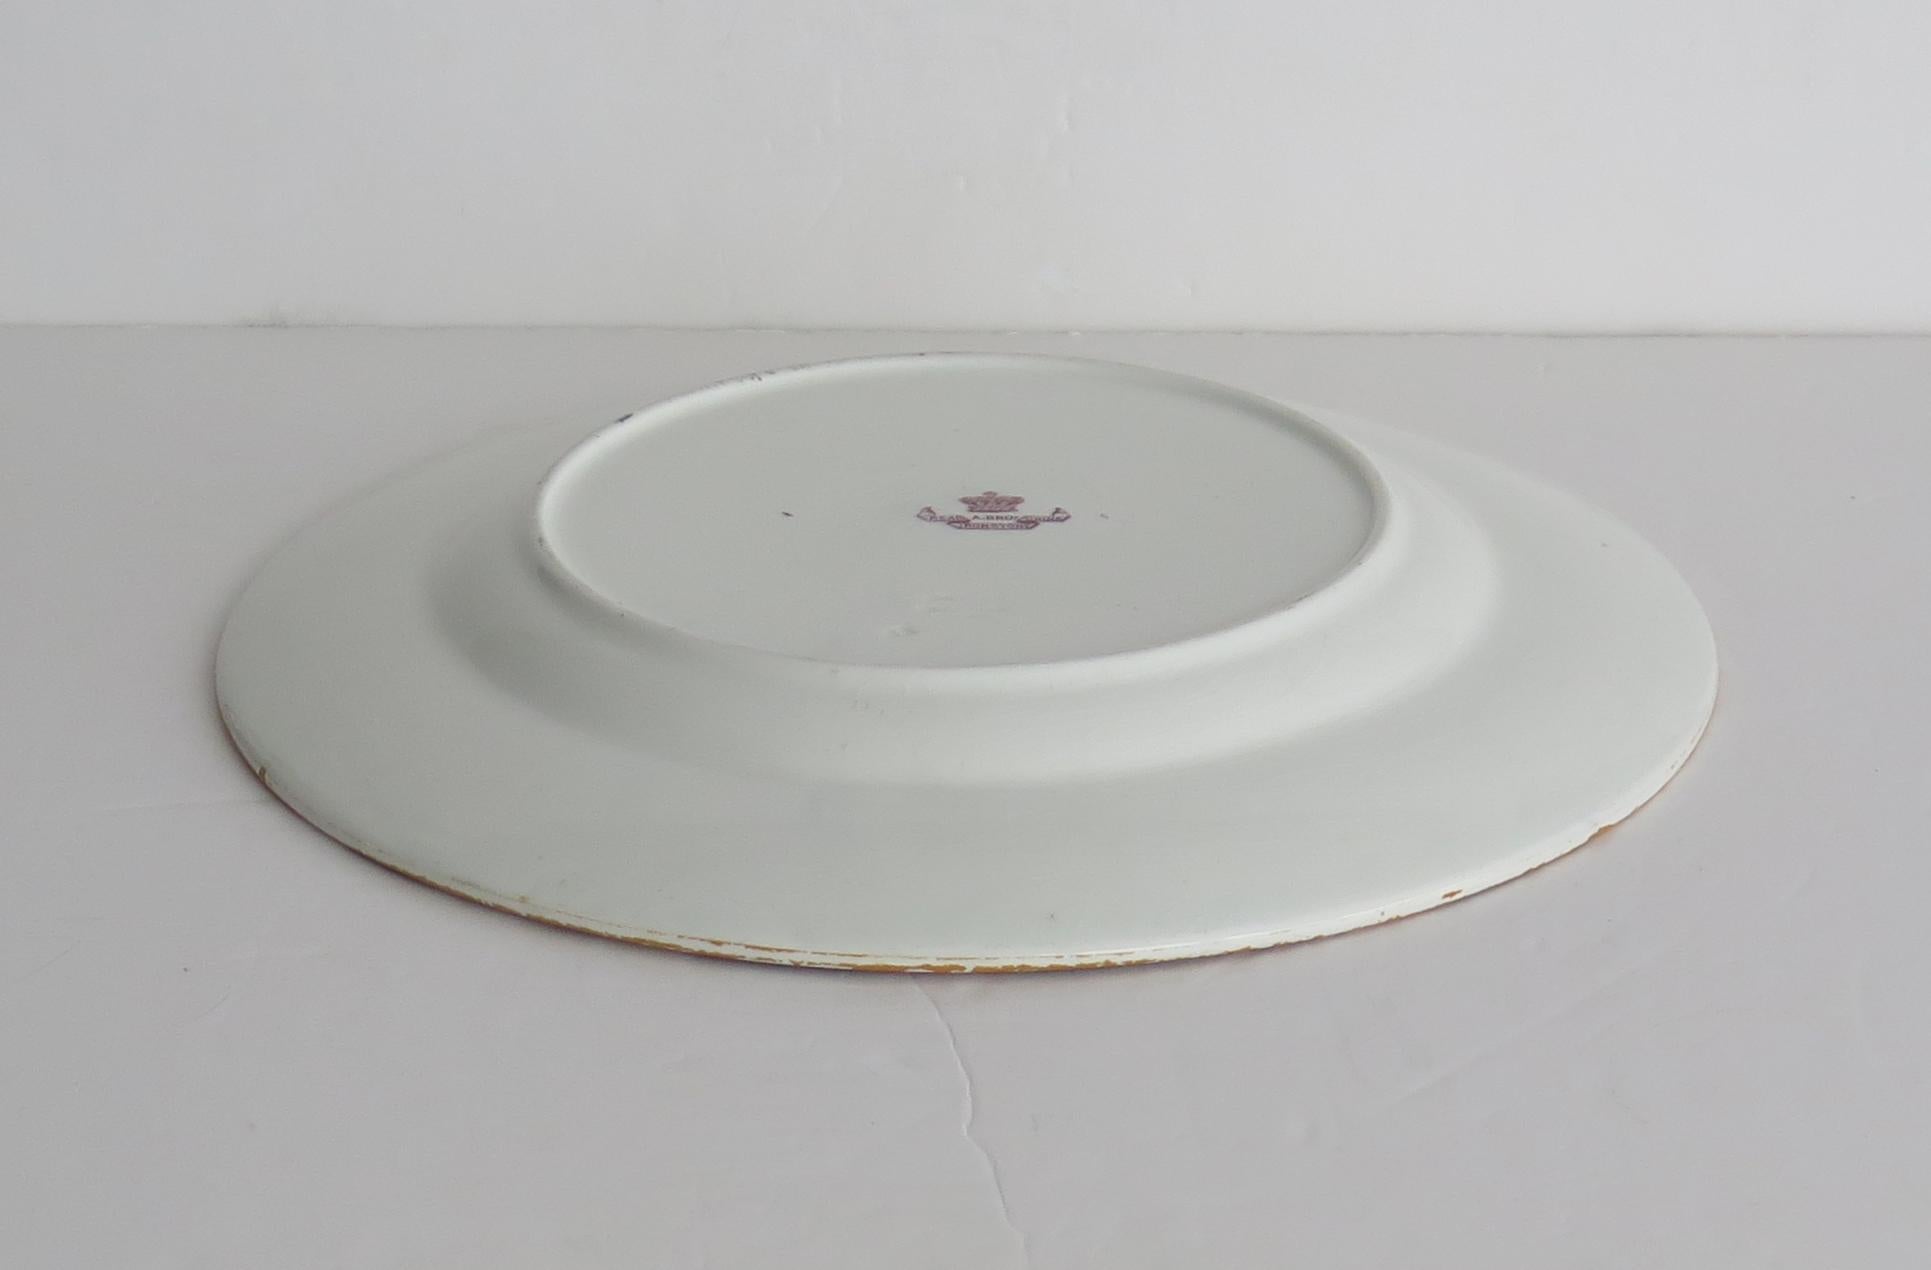 Mason's Ashworth's Ironstone Dinner Plate in Coloured Wall Pattern, circa 1870 For Sale 2